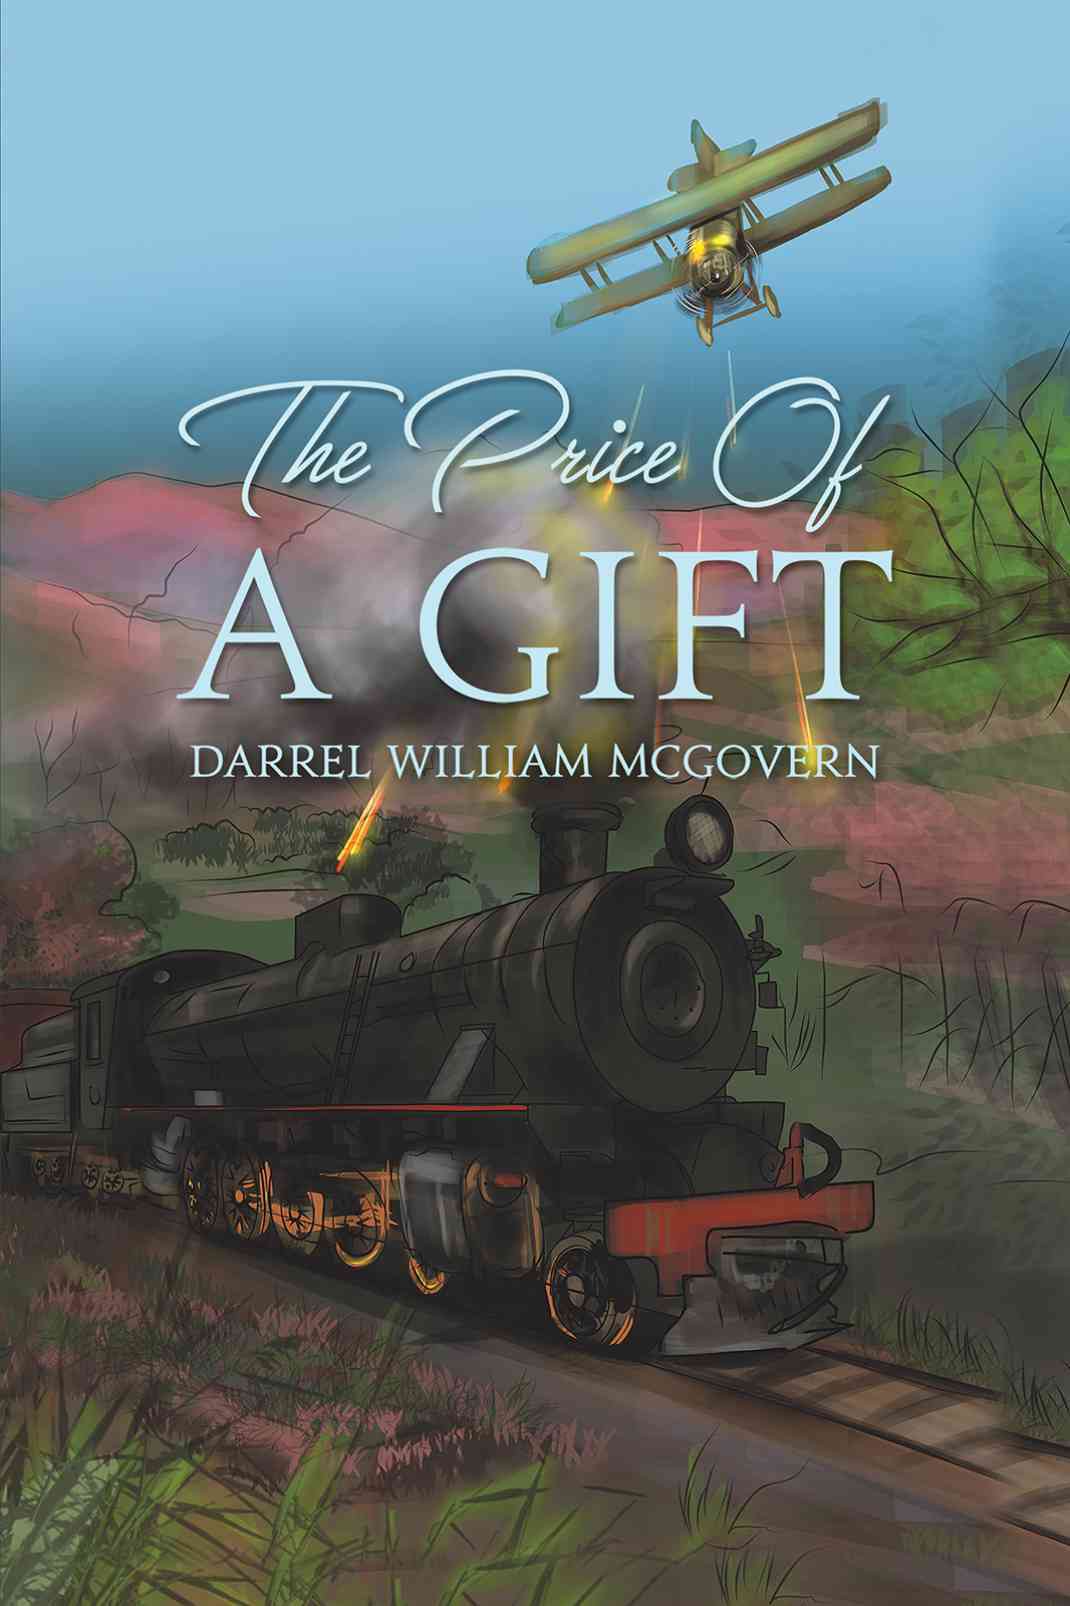 ‘The Price of a Gift’ by Darrel William featured in an online Giveaway Competition